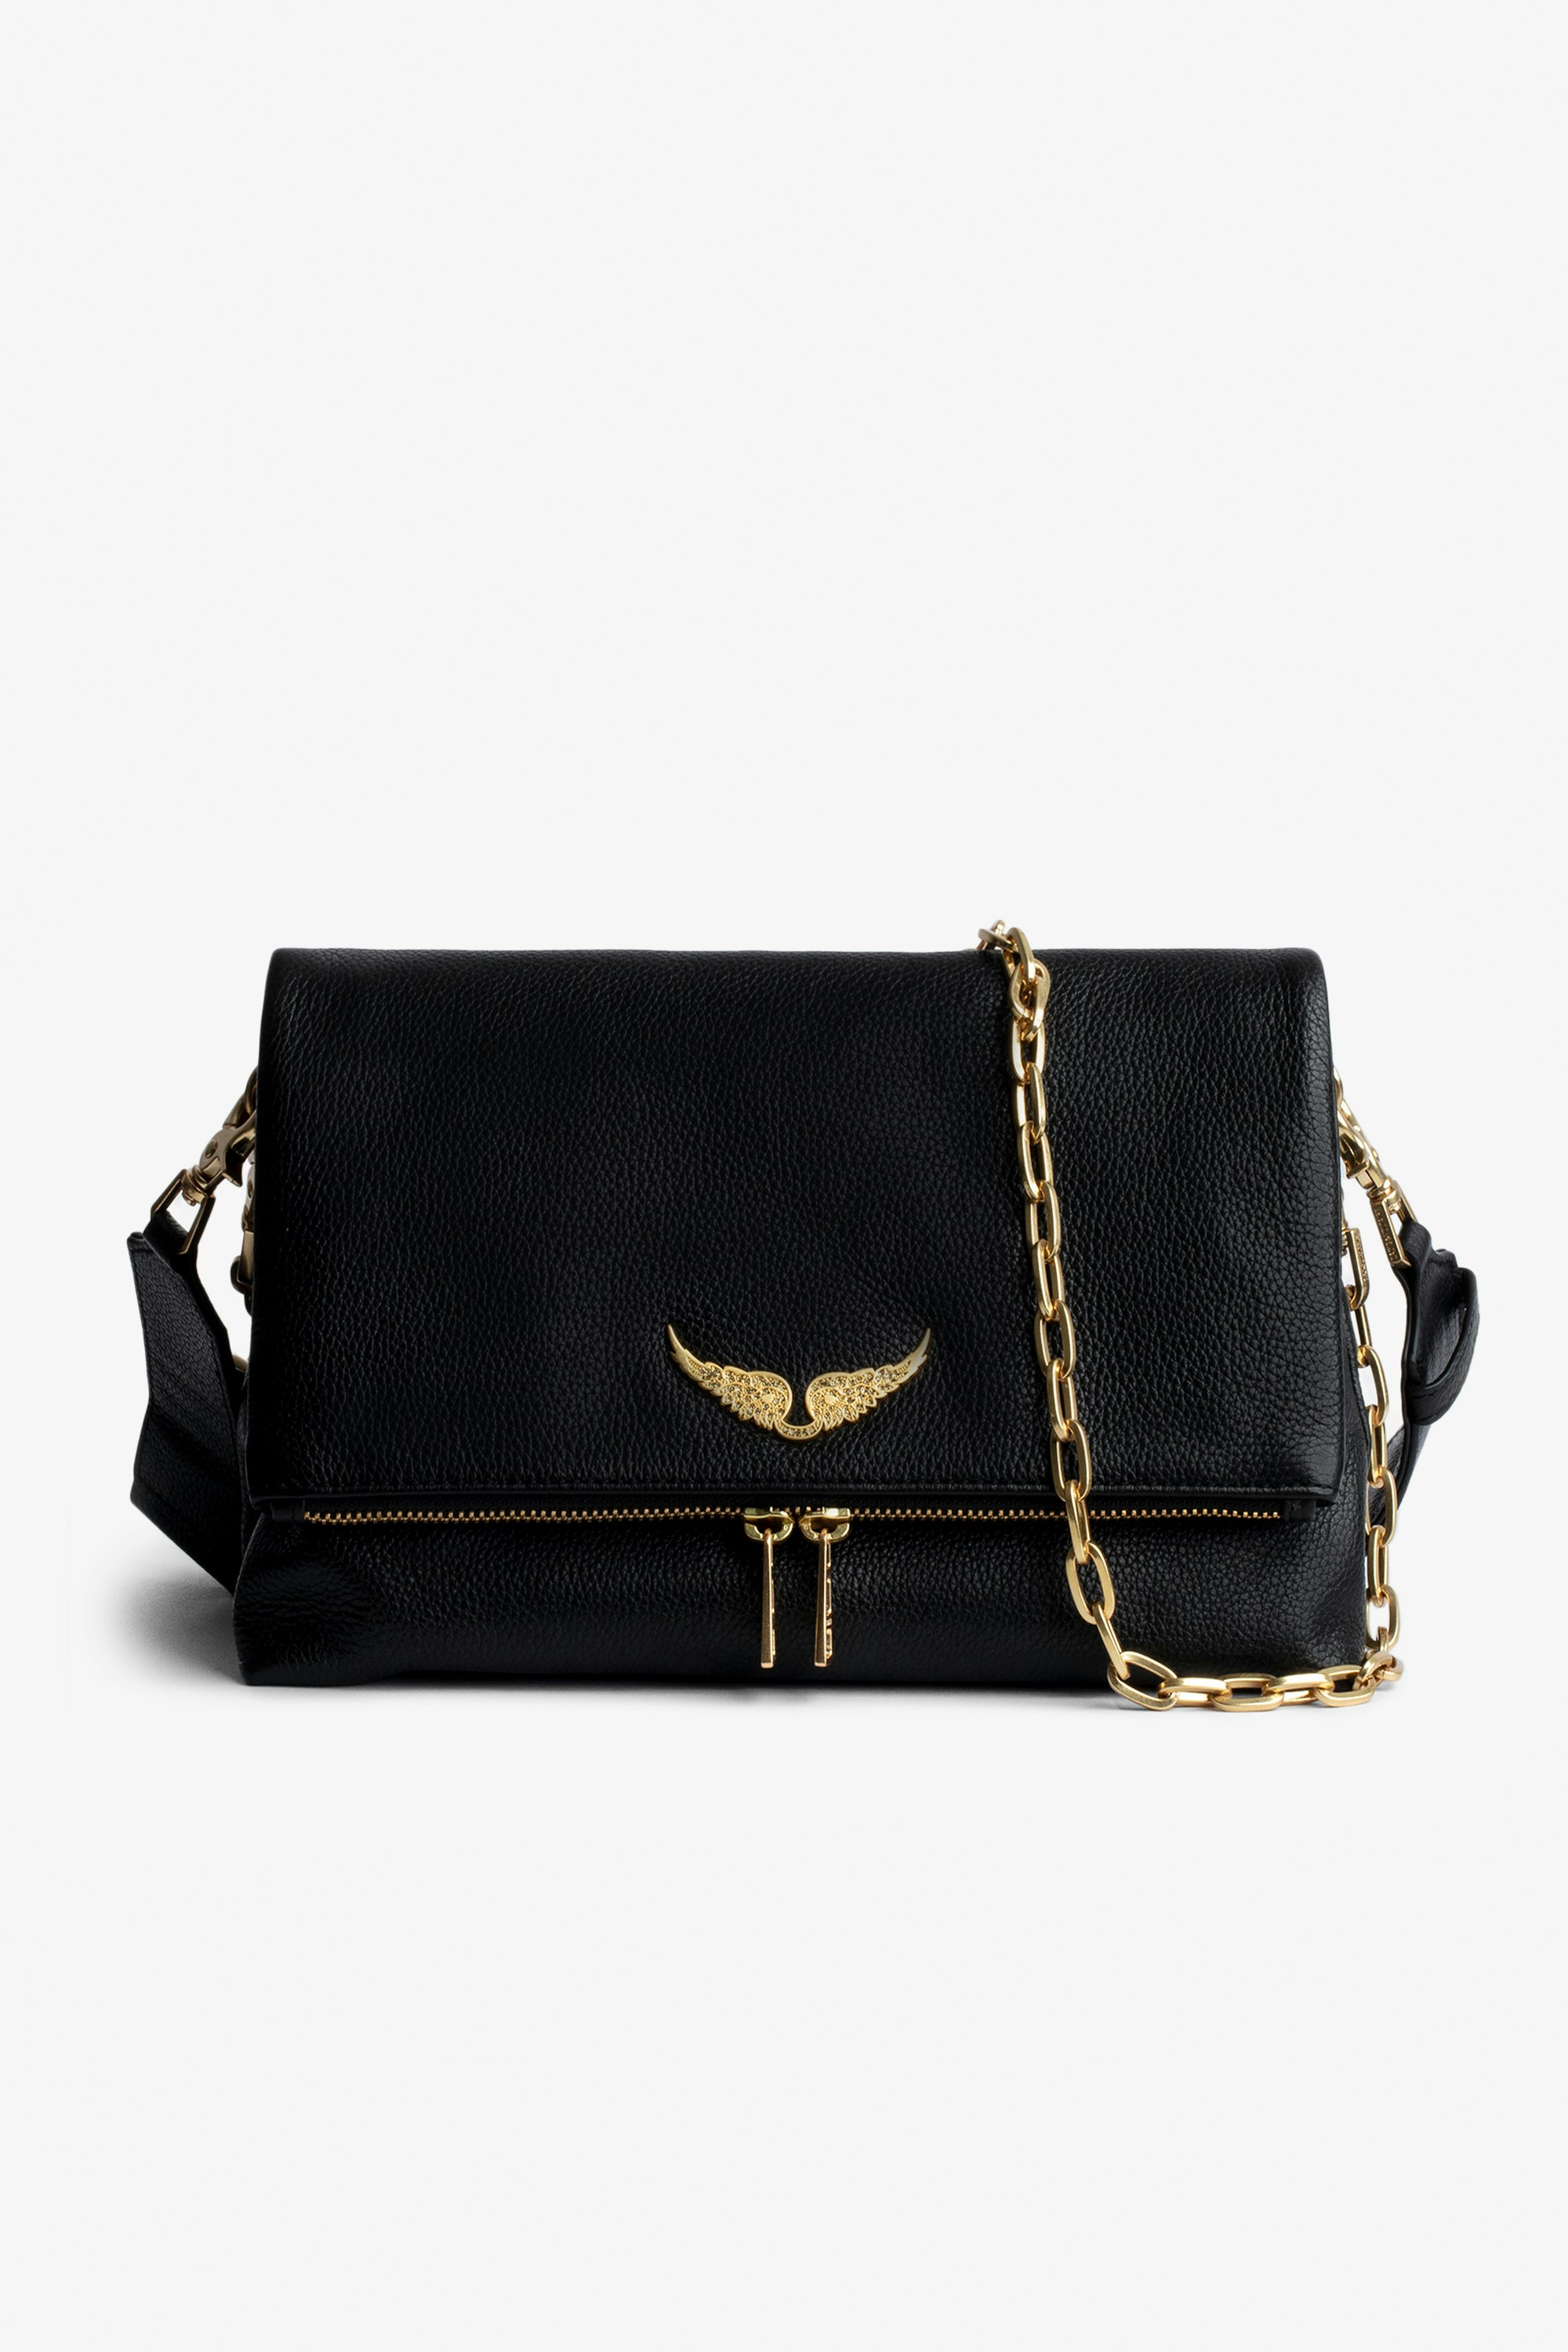 Rocky Bag - Women’s black grained leather bag with gold-toned chains and shoulder strap